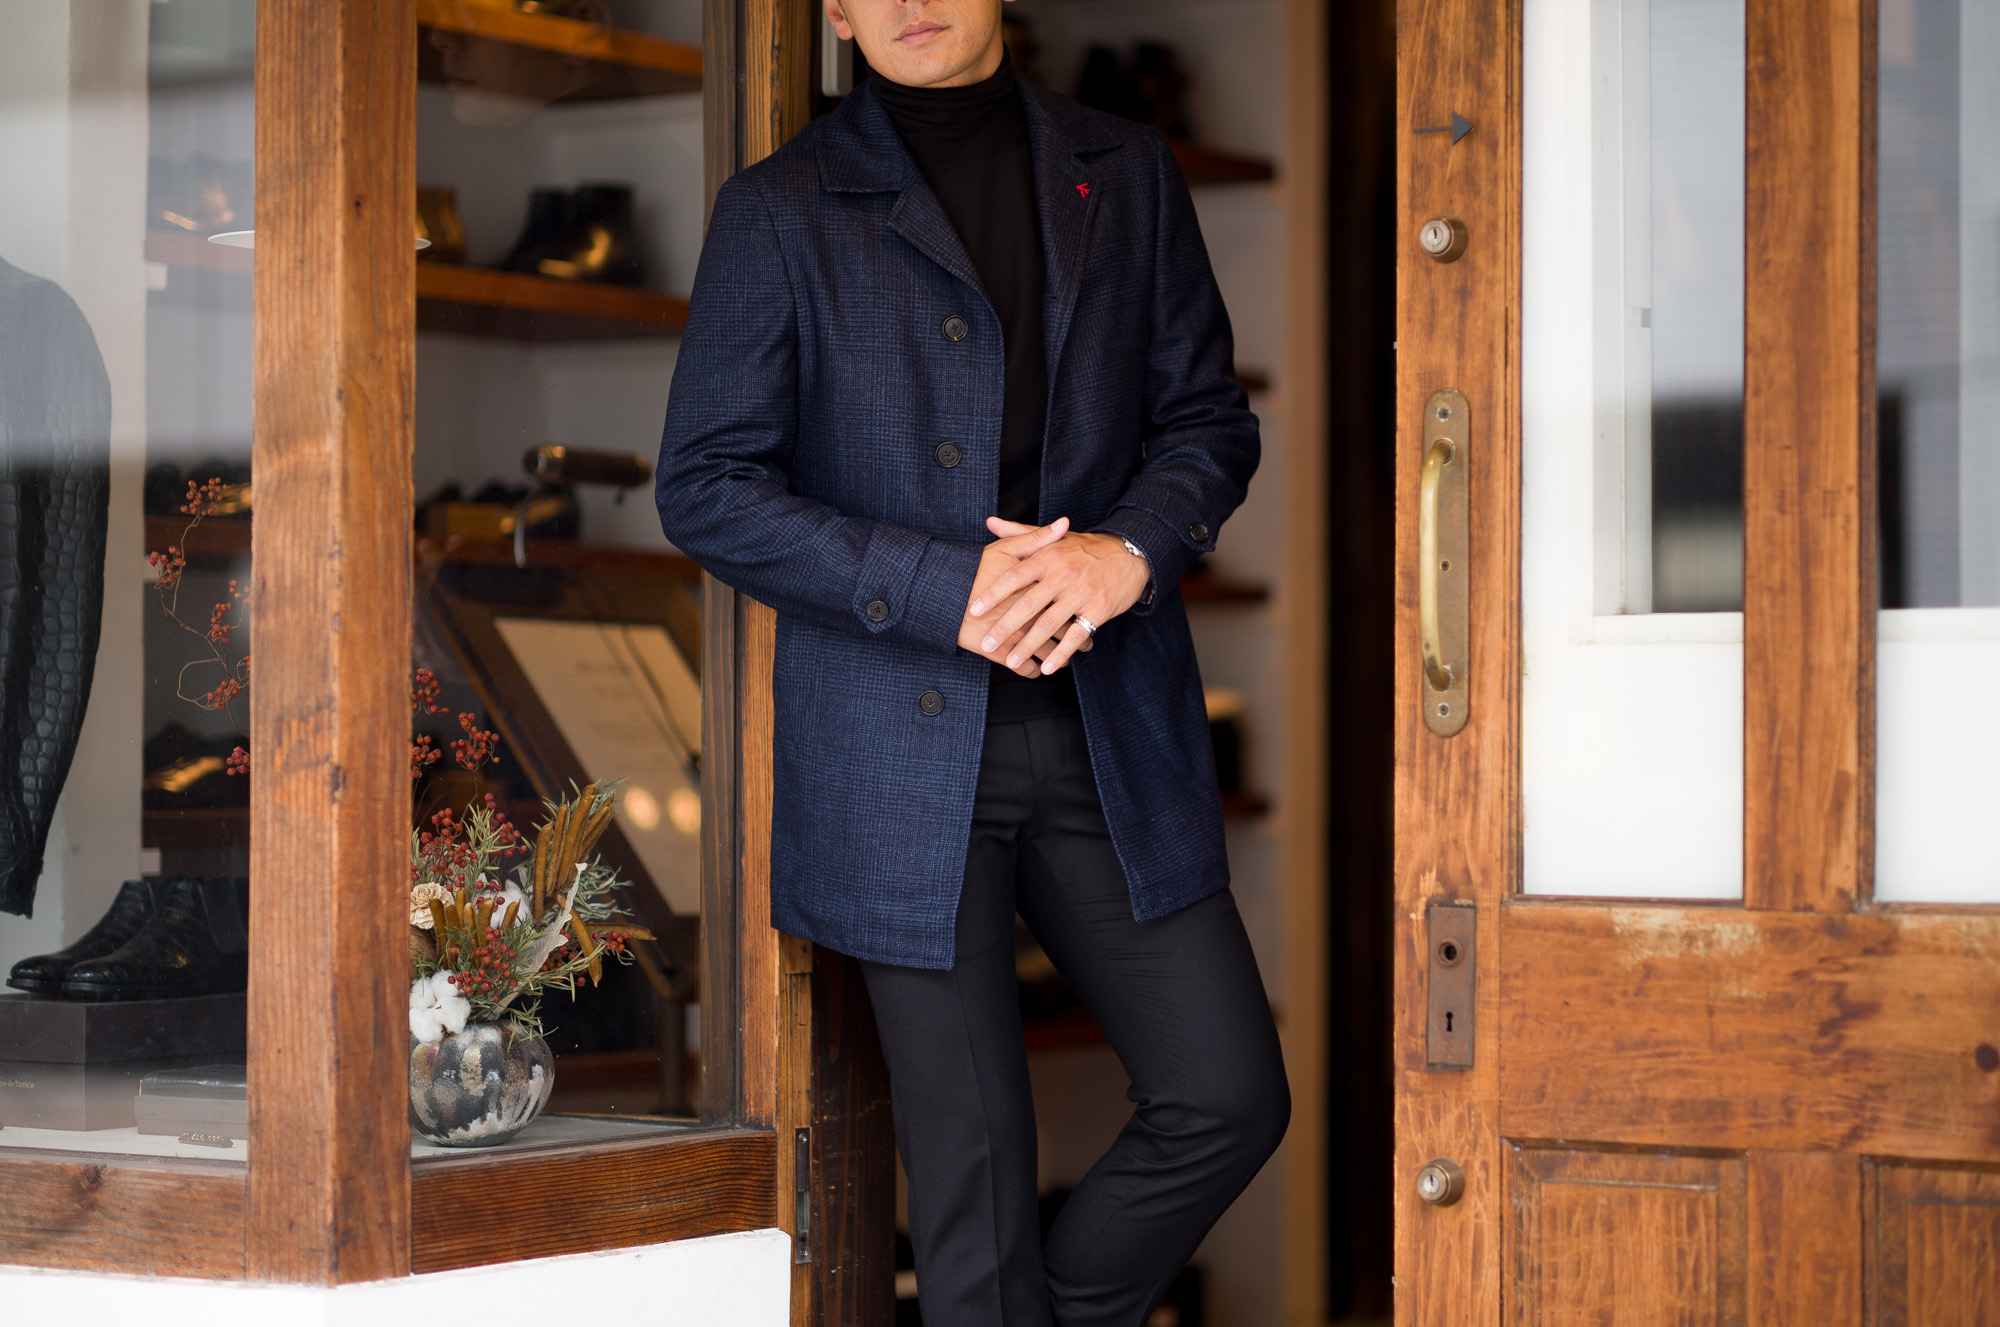 ISAIA(イザイア) CAPPOTTO(カポット) カシミヤ シルク カーコート NAVY(ネイビー) Made in italy (イタリア製) 2022秋冬【Special Model】愛知 名古屋 Alto e Diritto altoediritto アルトエデリット イザイア オーダー会 受注会